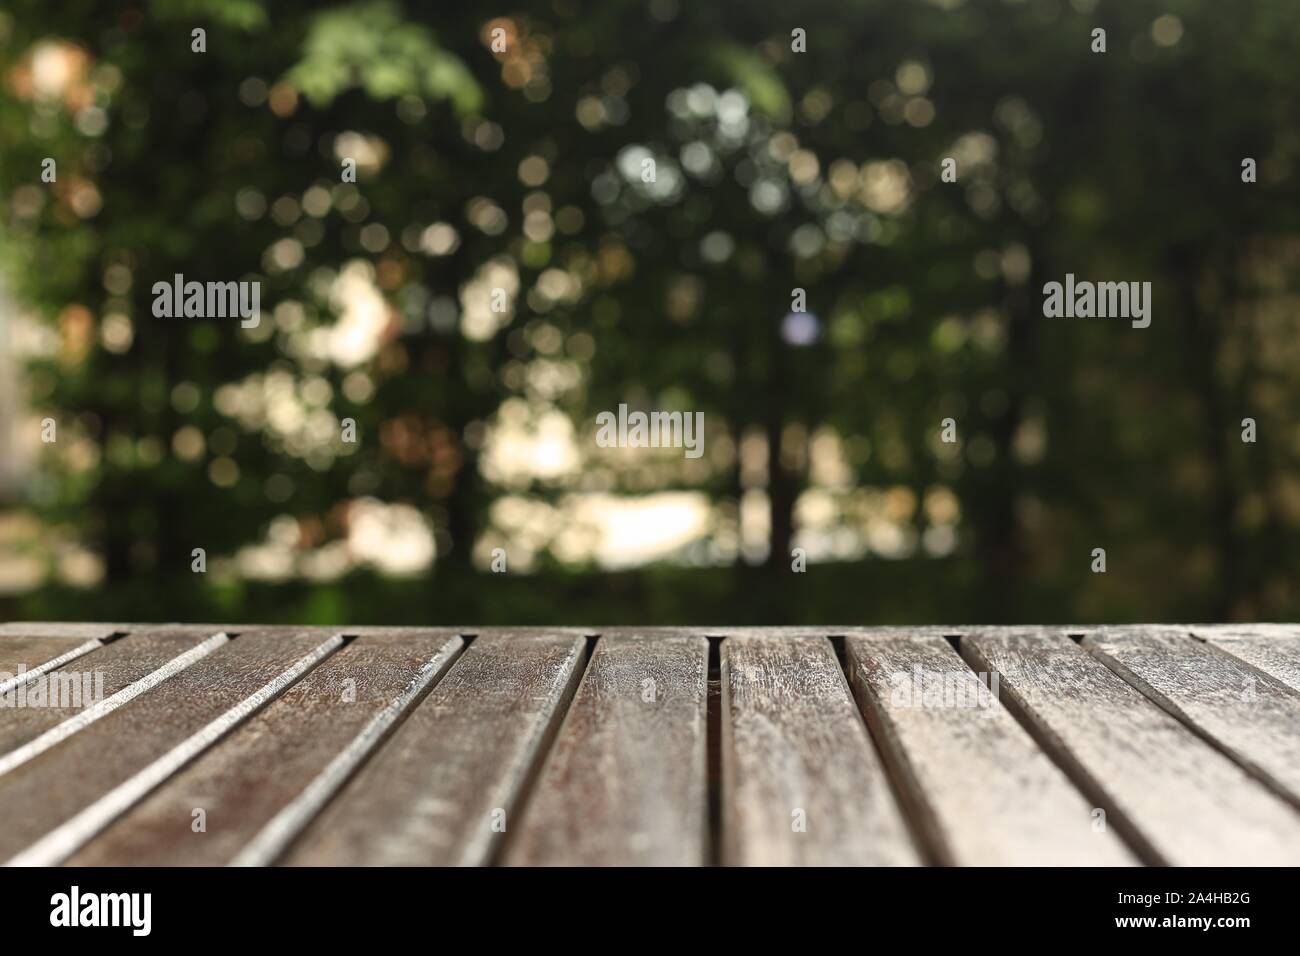 wooden floor background for products placement copy space. wood table in a garden. forest bokeh light background. warm tone image Stock Photo